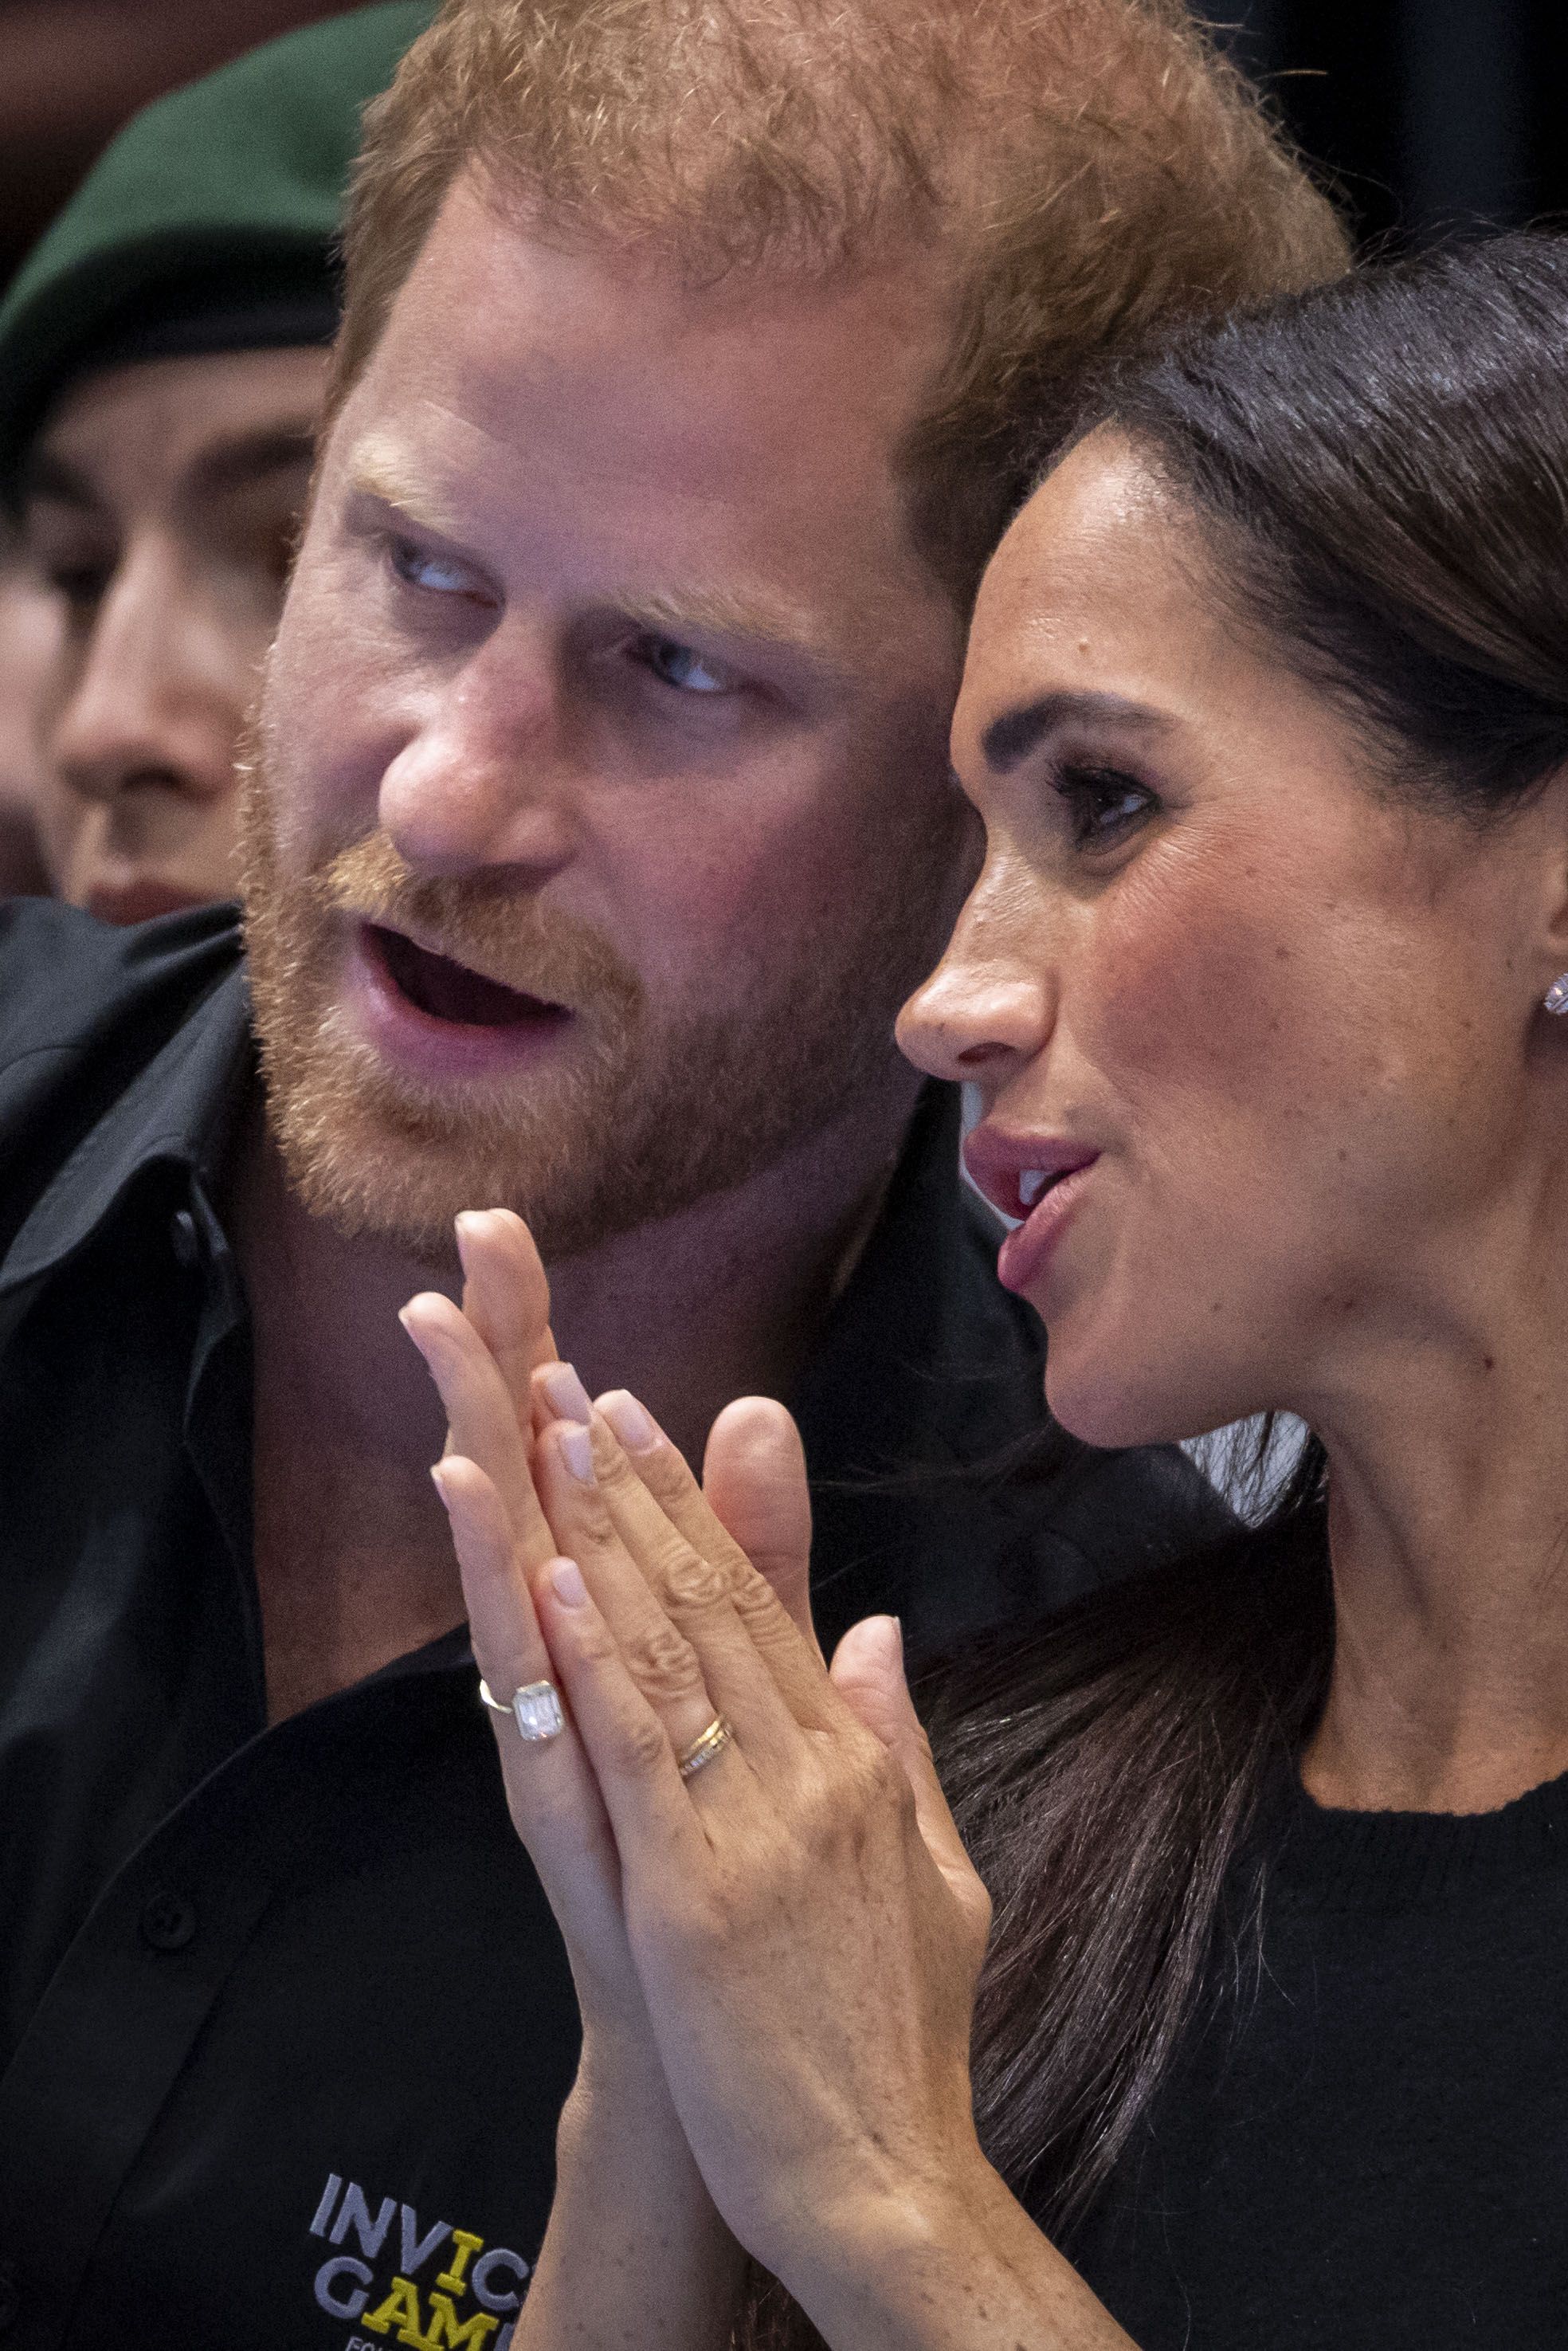 Here's What You Need To Know About Meghan Markle's Engagement Ring